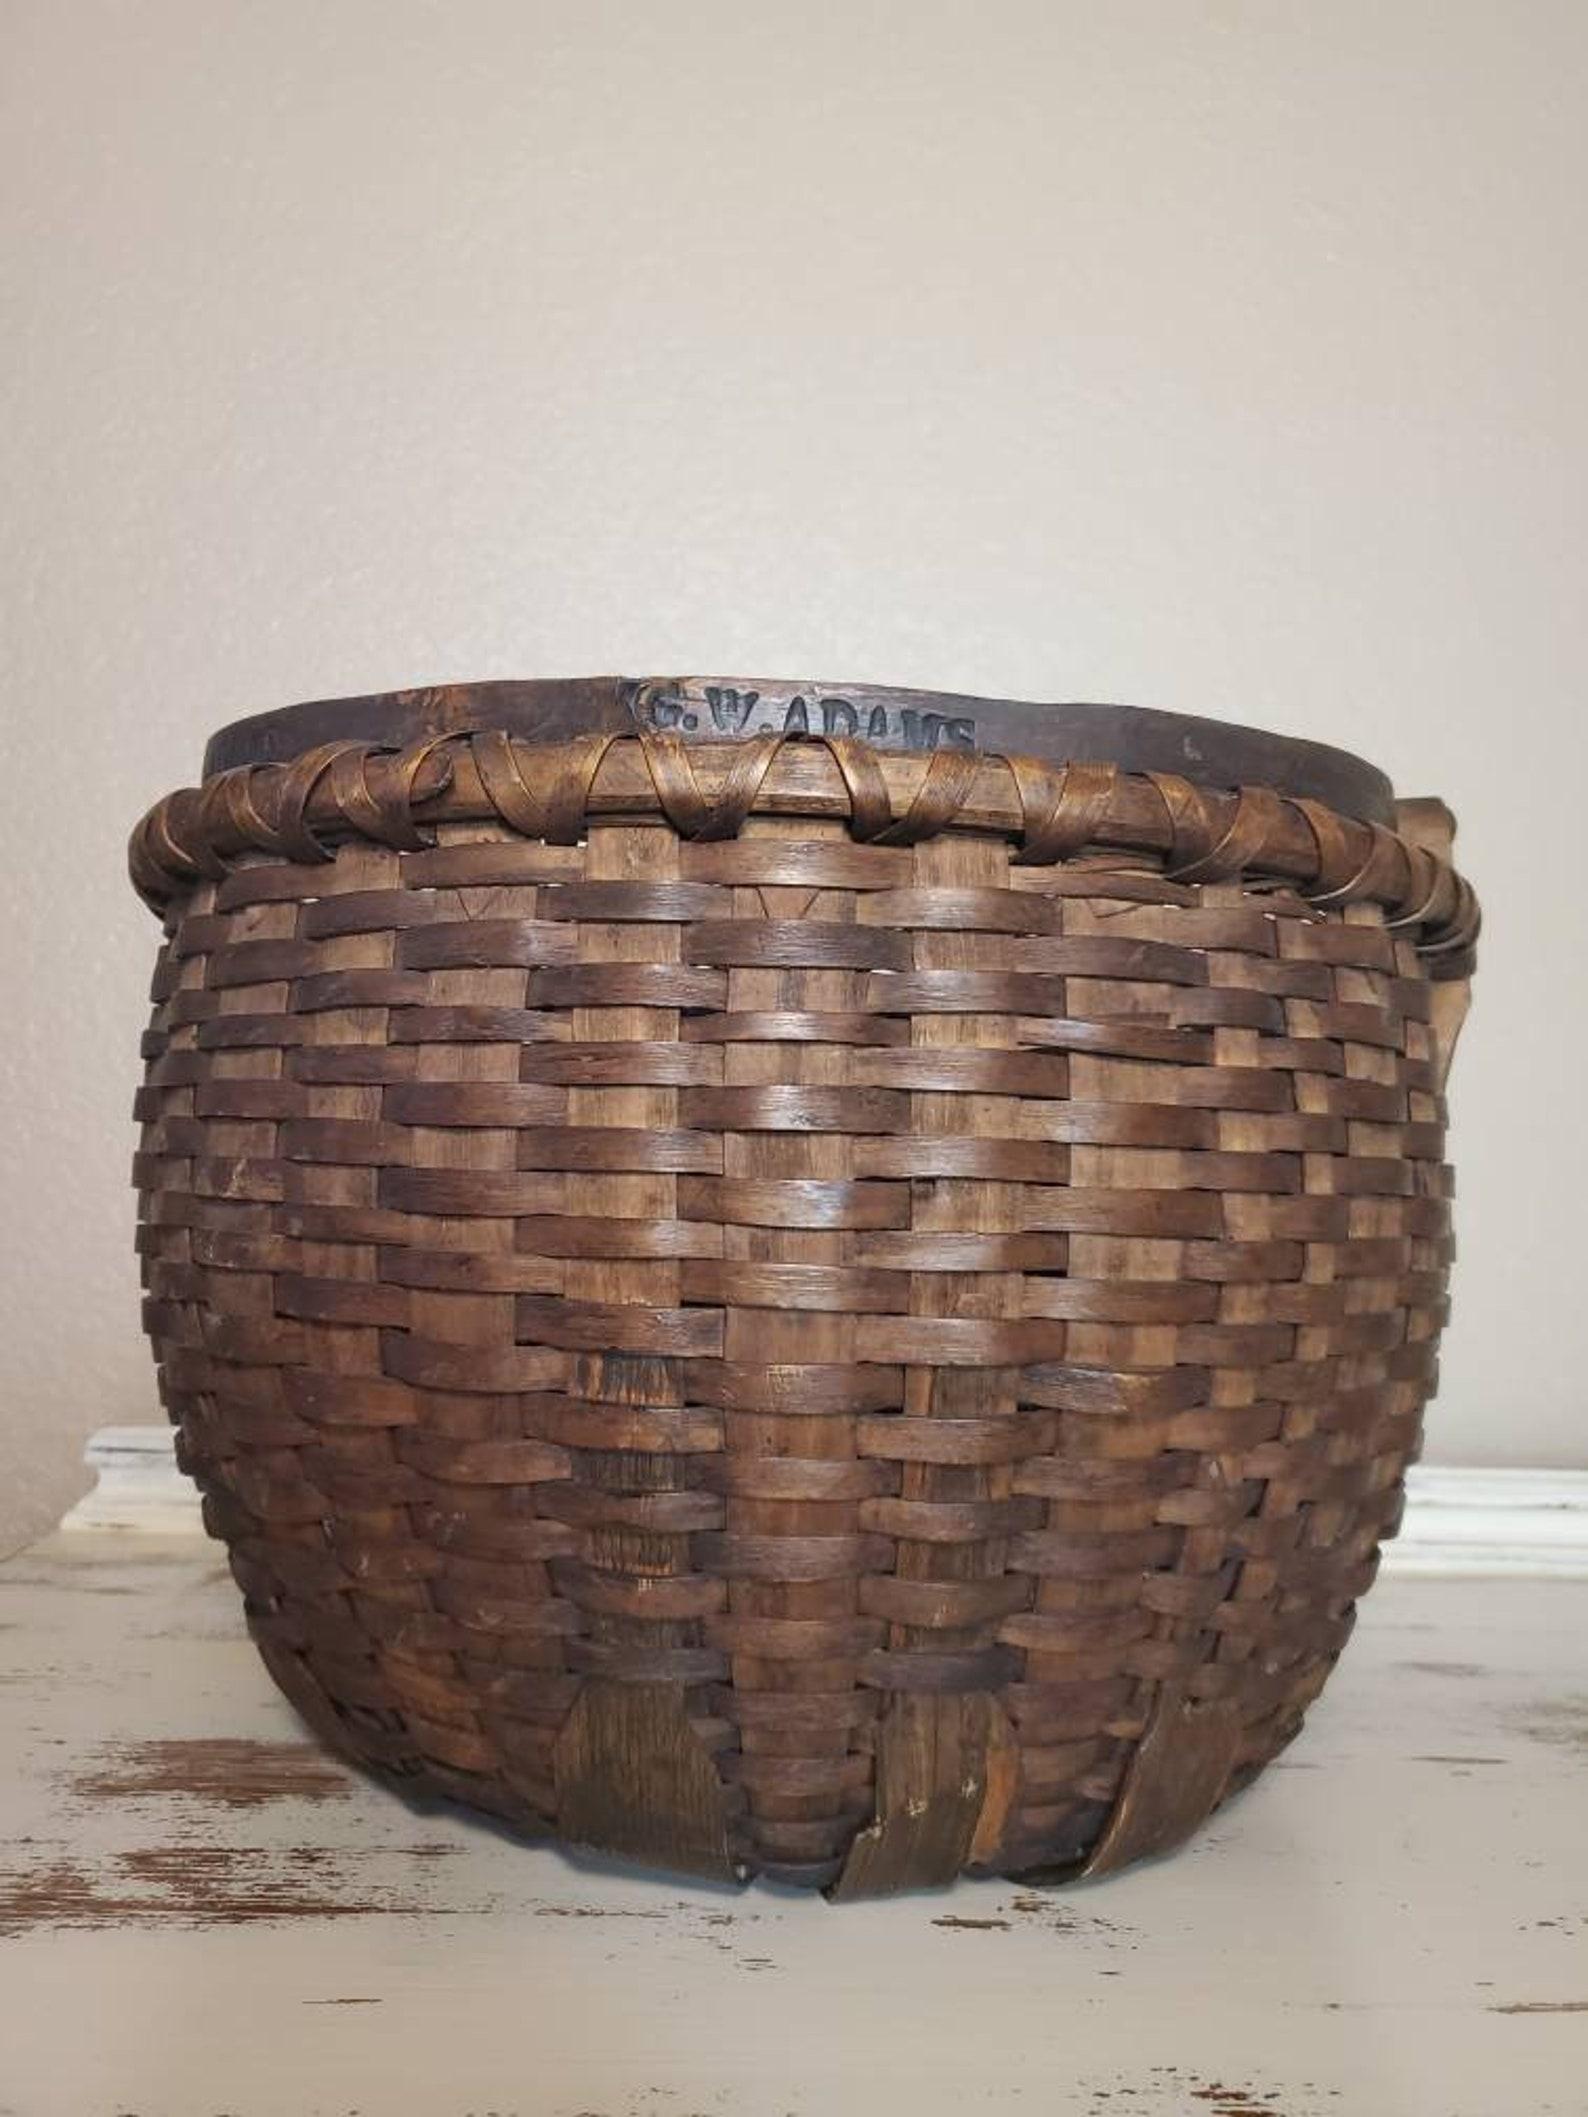 A beautiful large American stave woven splint basket from the 19th century, with a double rolled rim and a single swinging bentwood handle, signed G.W. Adams to both the handle and base. 

Gathering baskets like this were used to gather fruits,